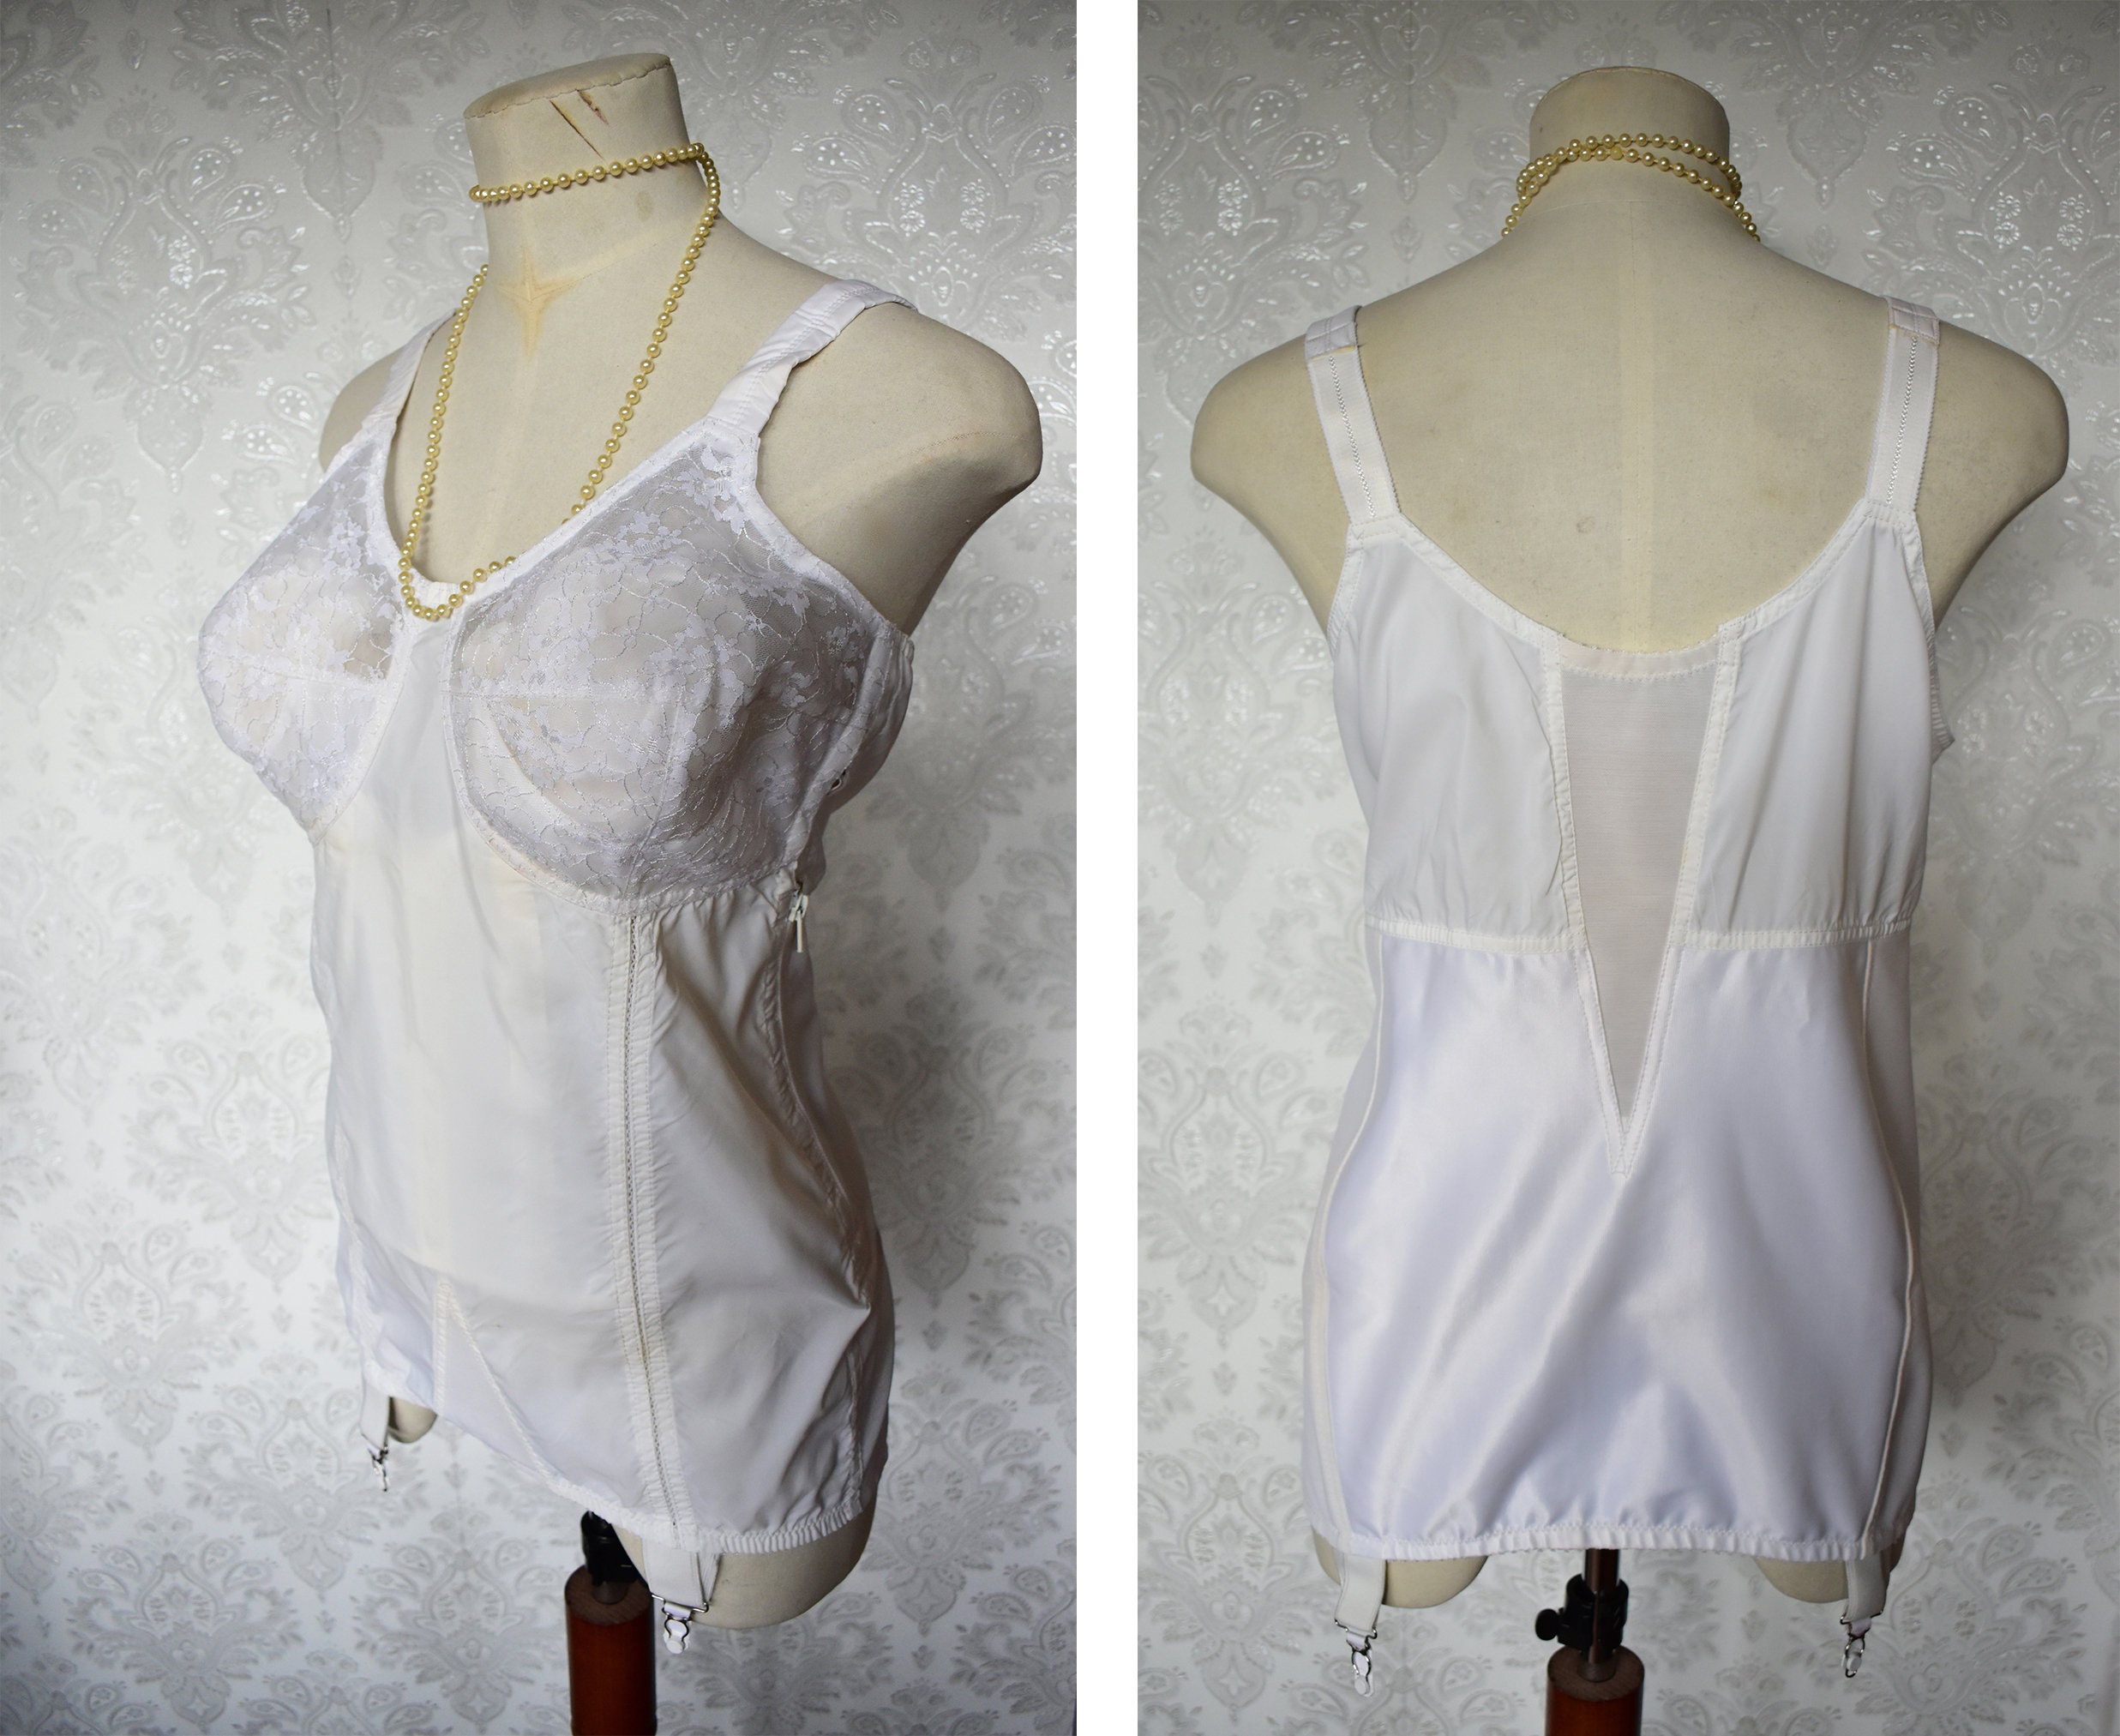 Vintage Full Body Girdle Nu-back All in One Shapewear Dead Stock With Tags  Cortland Corset Co. Sz 36B Pin up Corsalette 